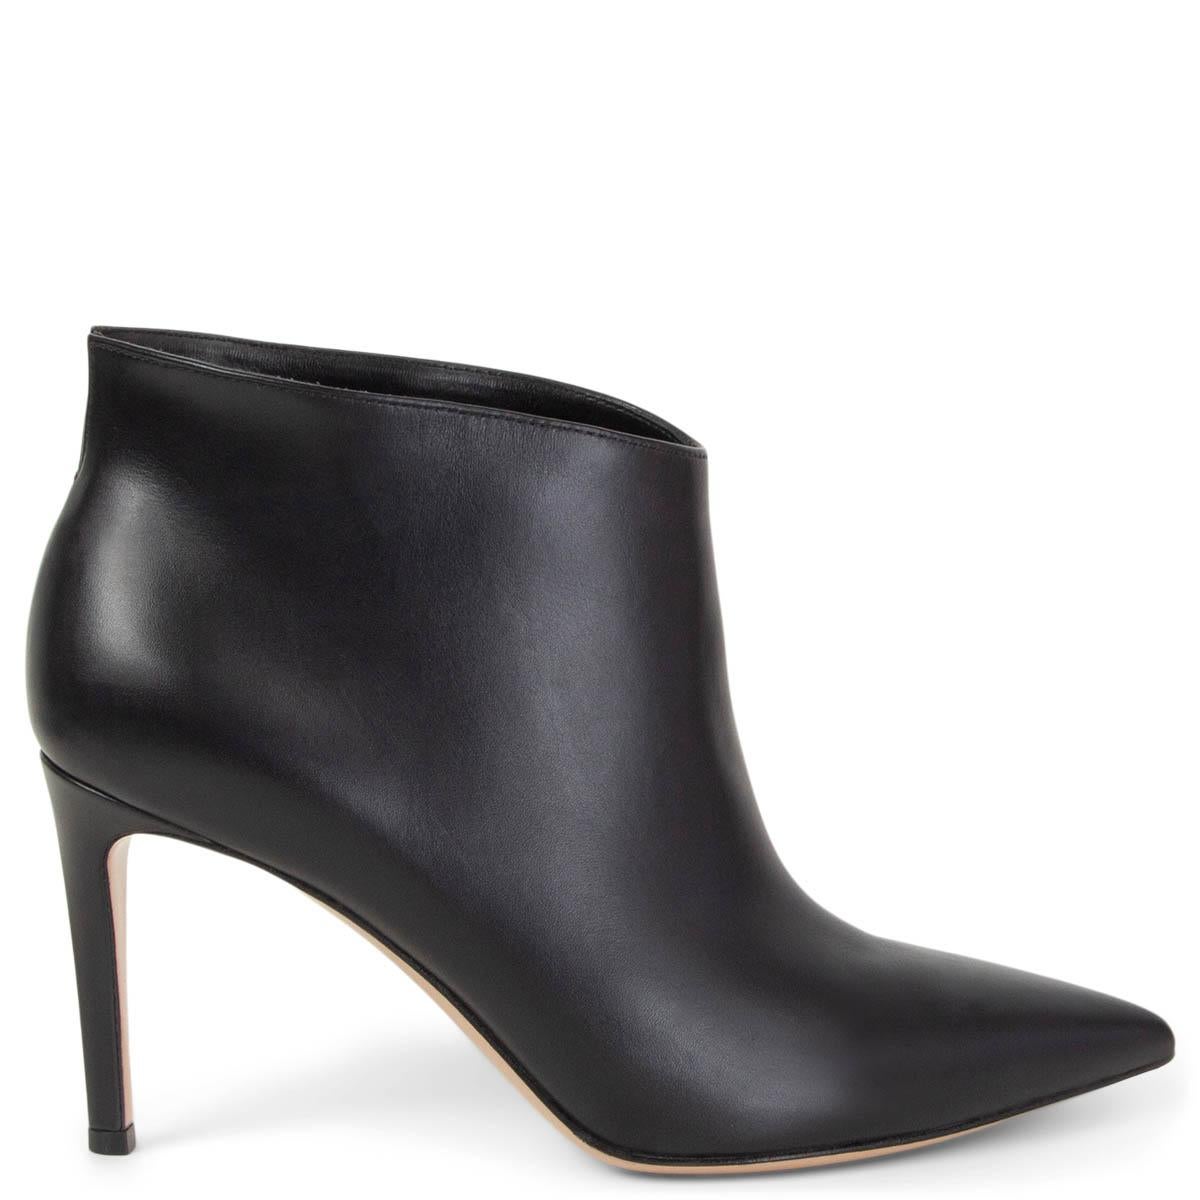 100% authentic Gianvito Rossi Kat ankle-booties in black calfskin. Have been worn once and are in virtually new condition. Come with dust bag. 

Measurements
Imprinted Size	36.5
Shoe Size	36.5
Inside Sole	23.5cm (9.2in)
Width	7cm (2.7in)
Heel	8cm